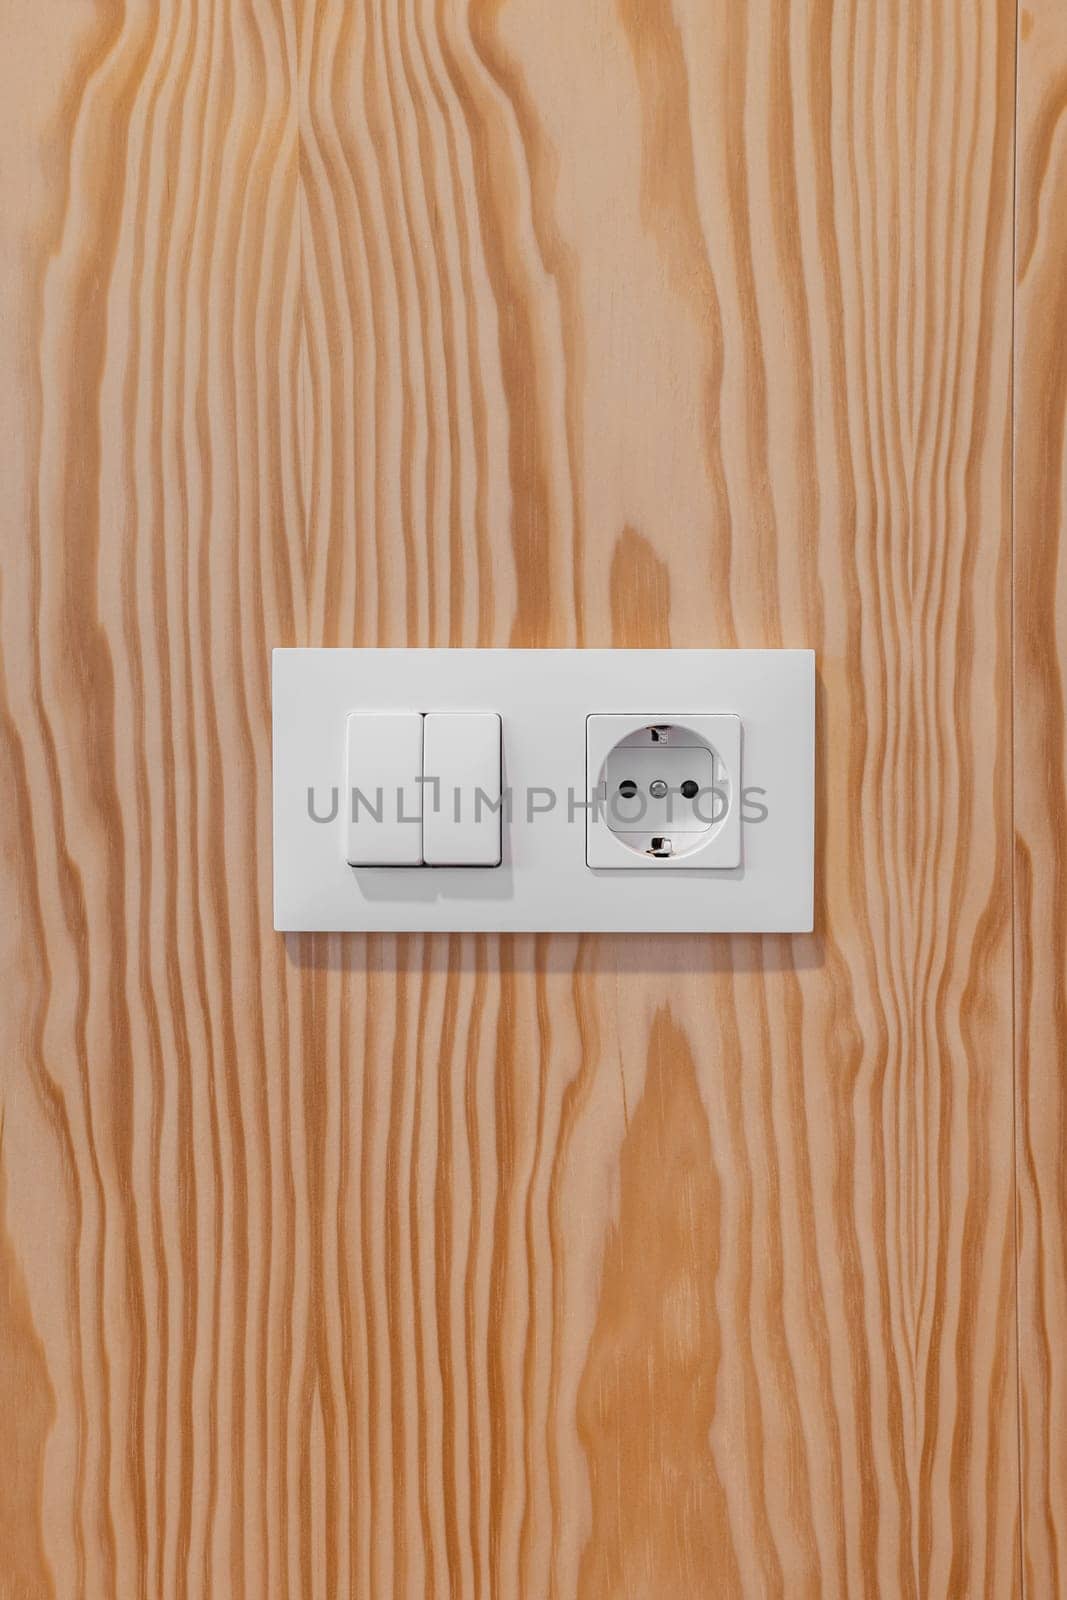 A Light Switch And A Socket On A Wooden Wall by apavlin